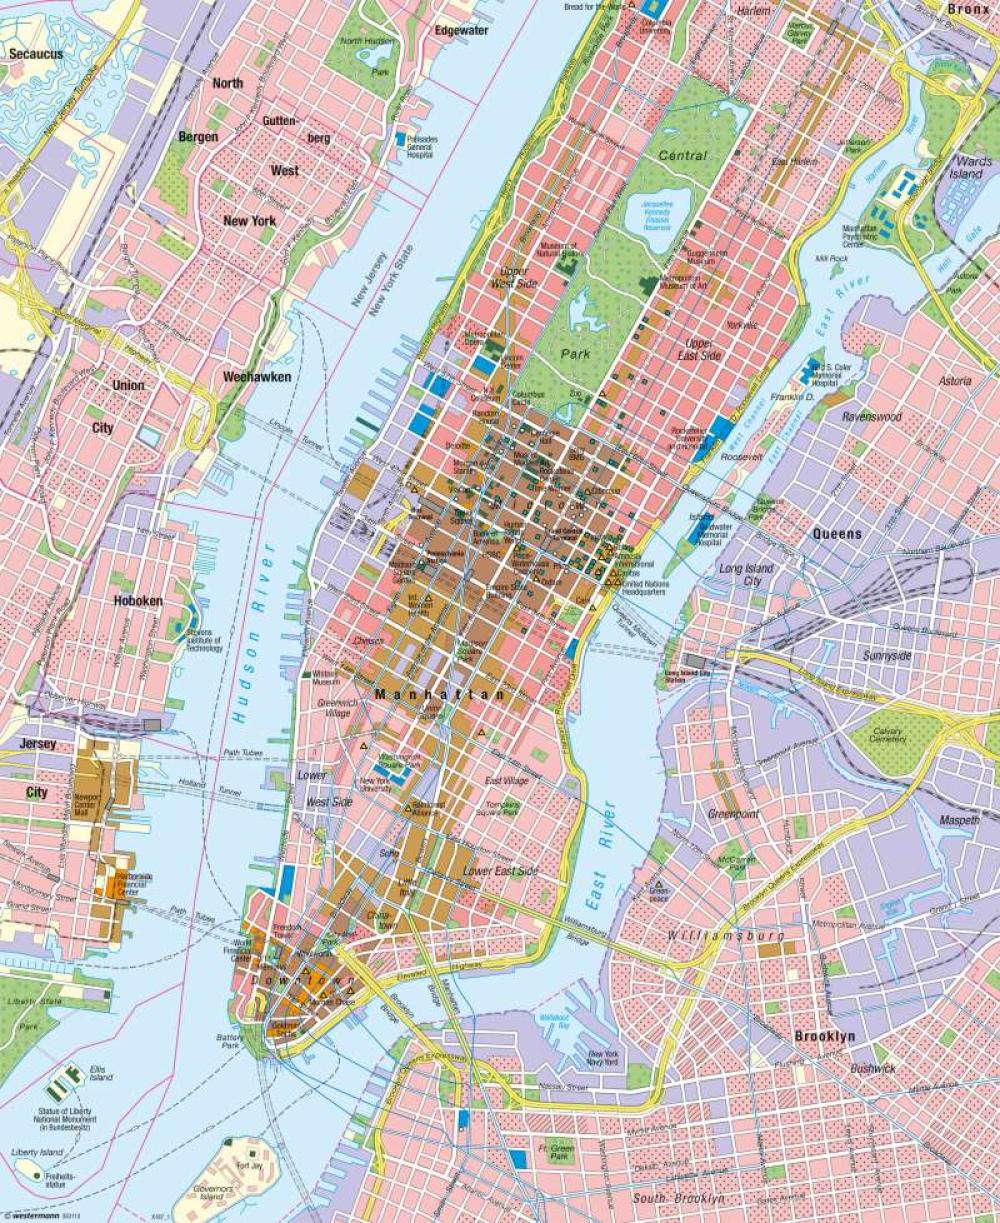 New York – Global Cities, Local Streets